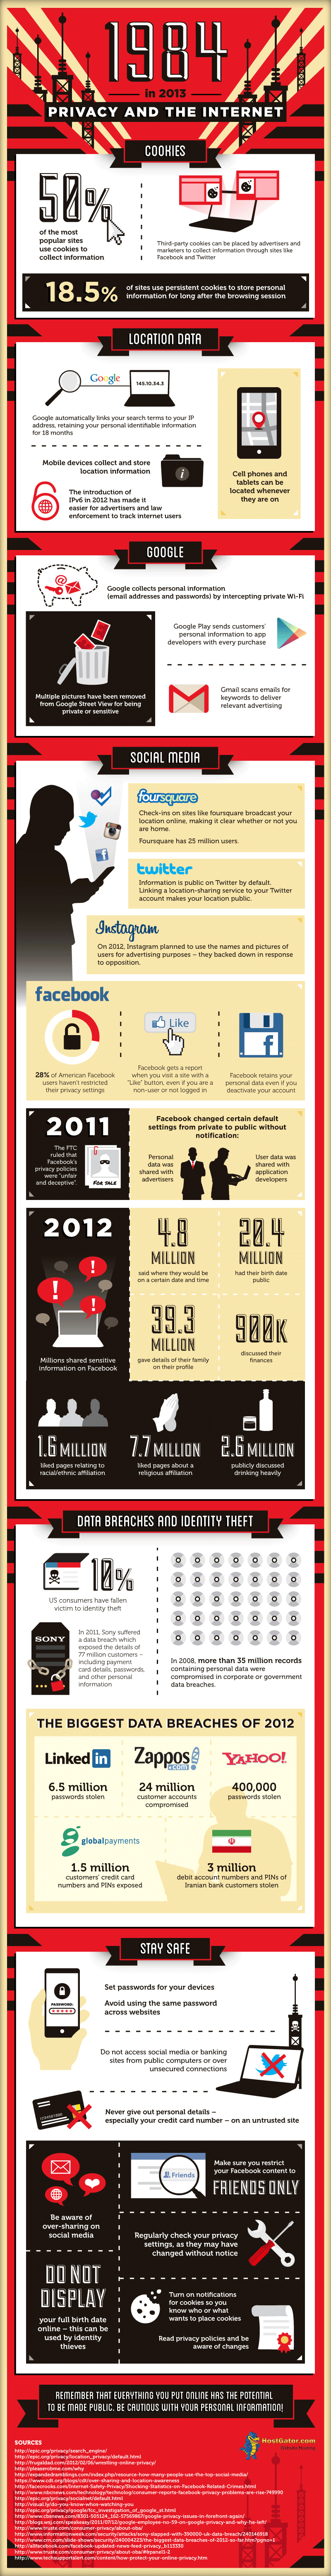 The Worrying State Of Internet Privacy In 2013 [Infographic]